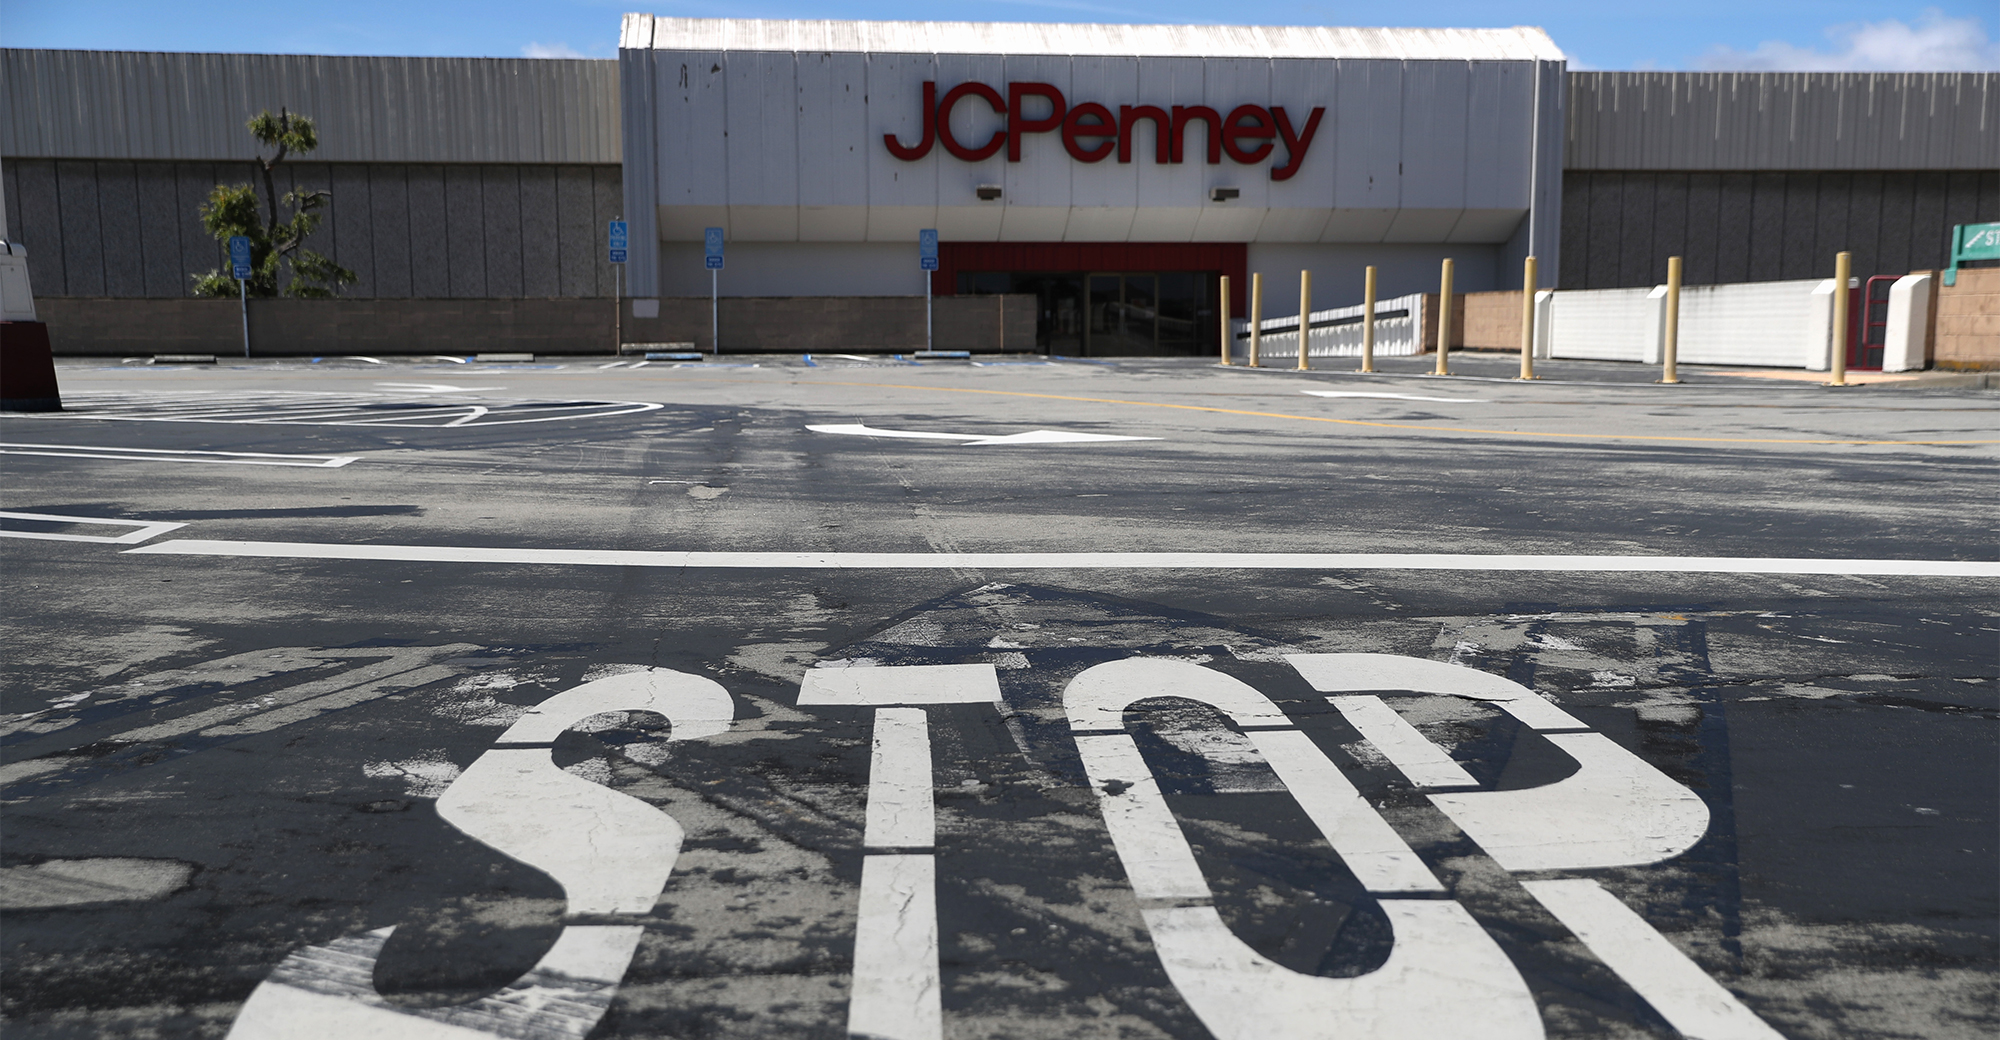 J.C. Penney photos: Chapter 11 bankruptcy threatens retailer